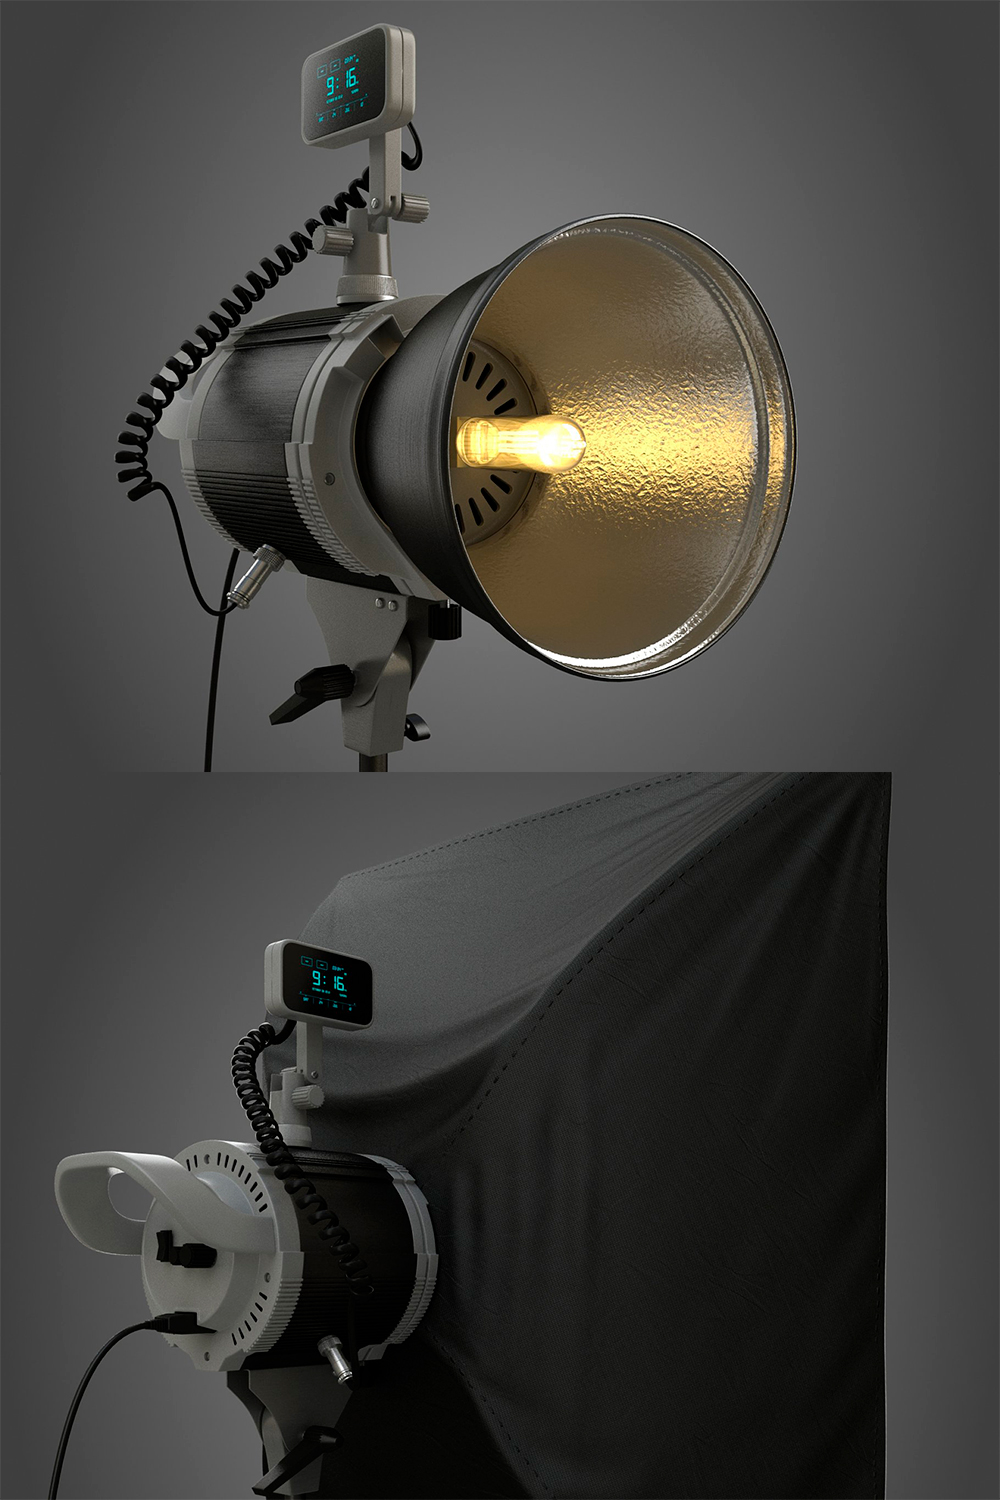 Rendering of an irresistible 3d model of a professional studio lamp and softbox